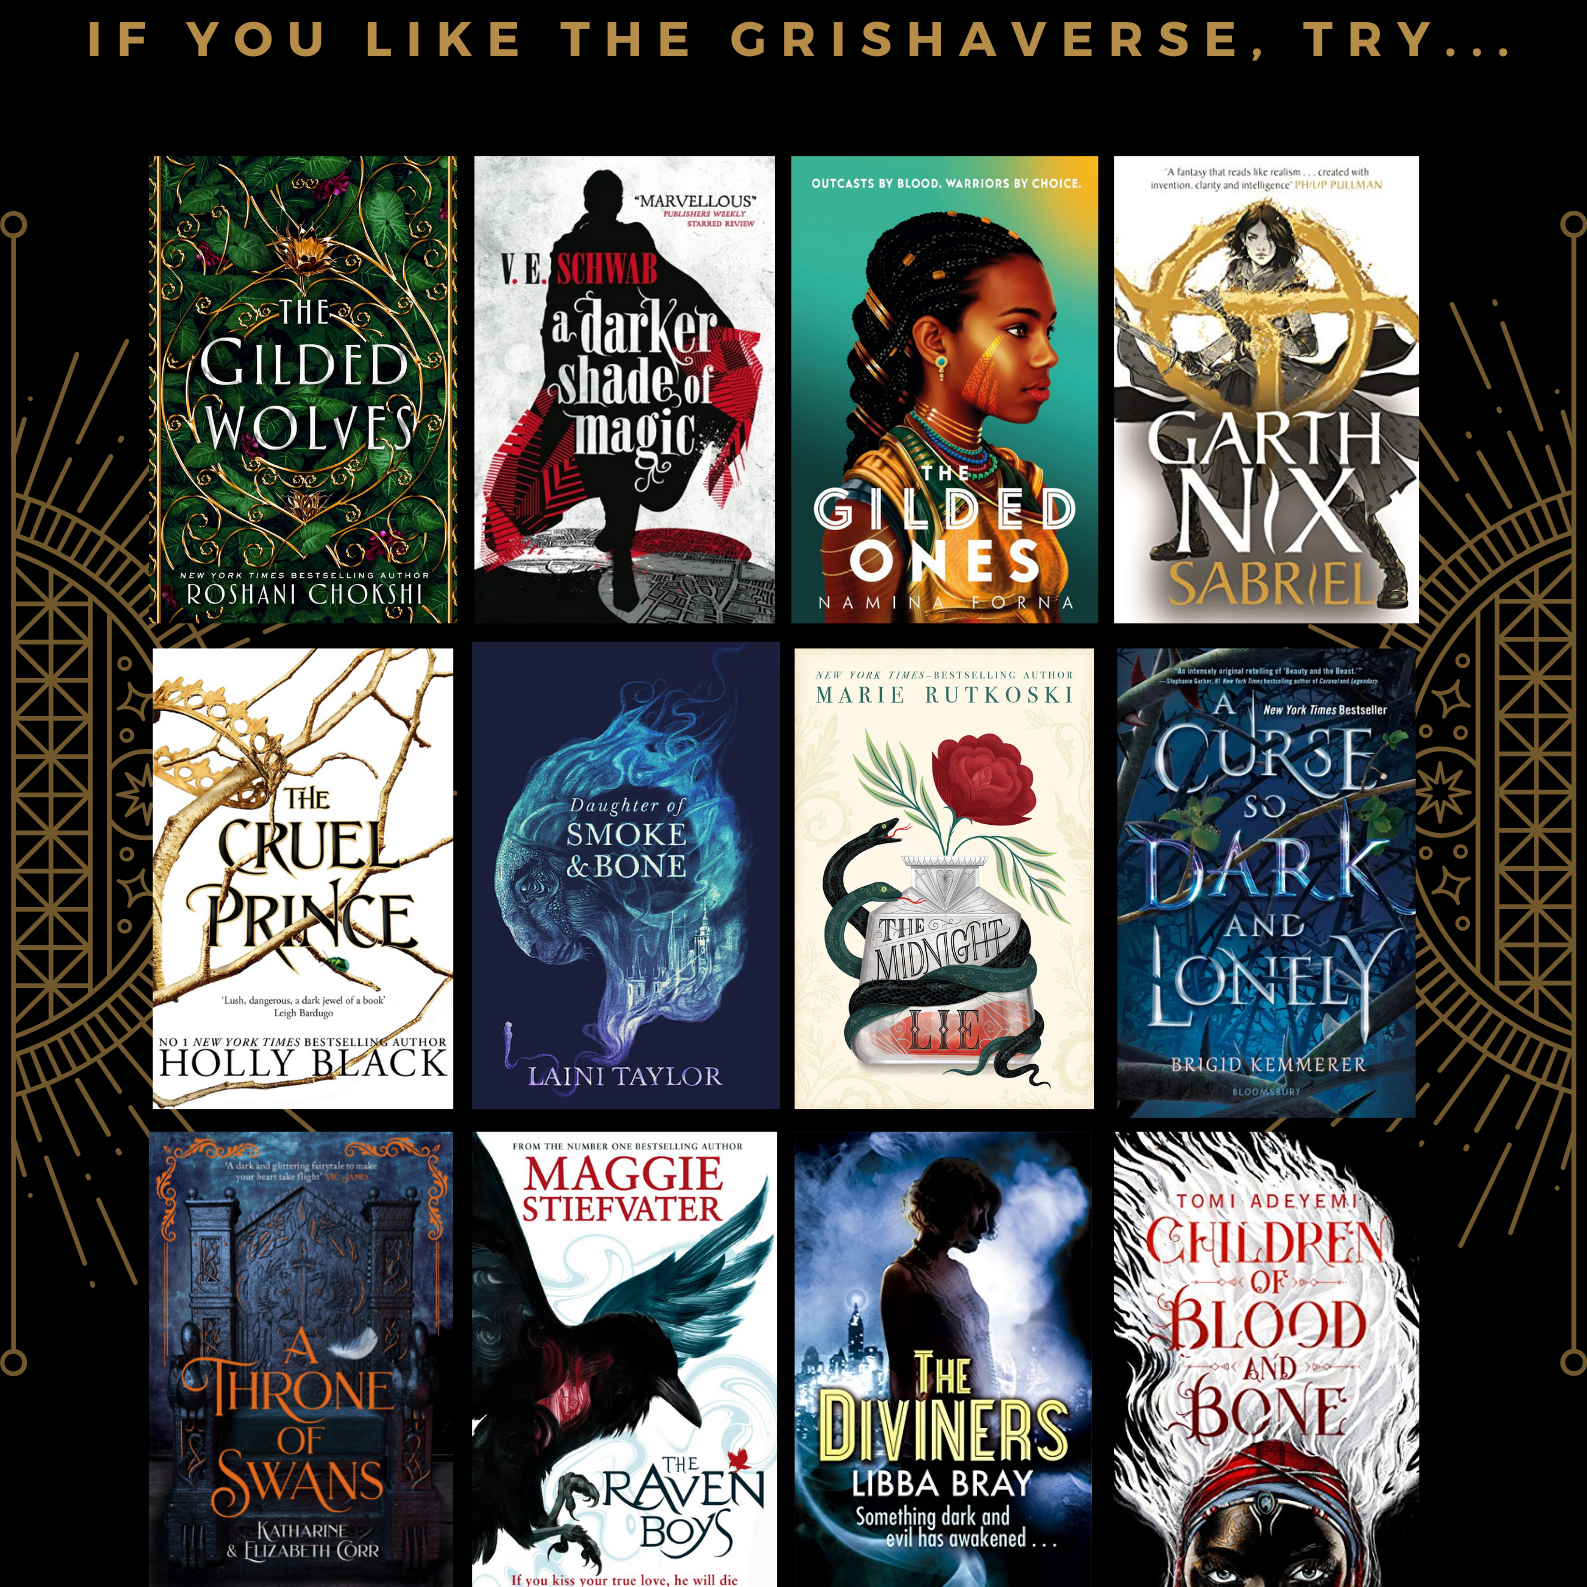 Image is of 15 YA books that may interest fans of Shadow and Bone.